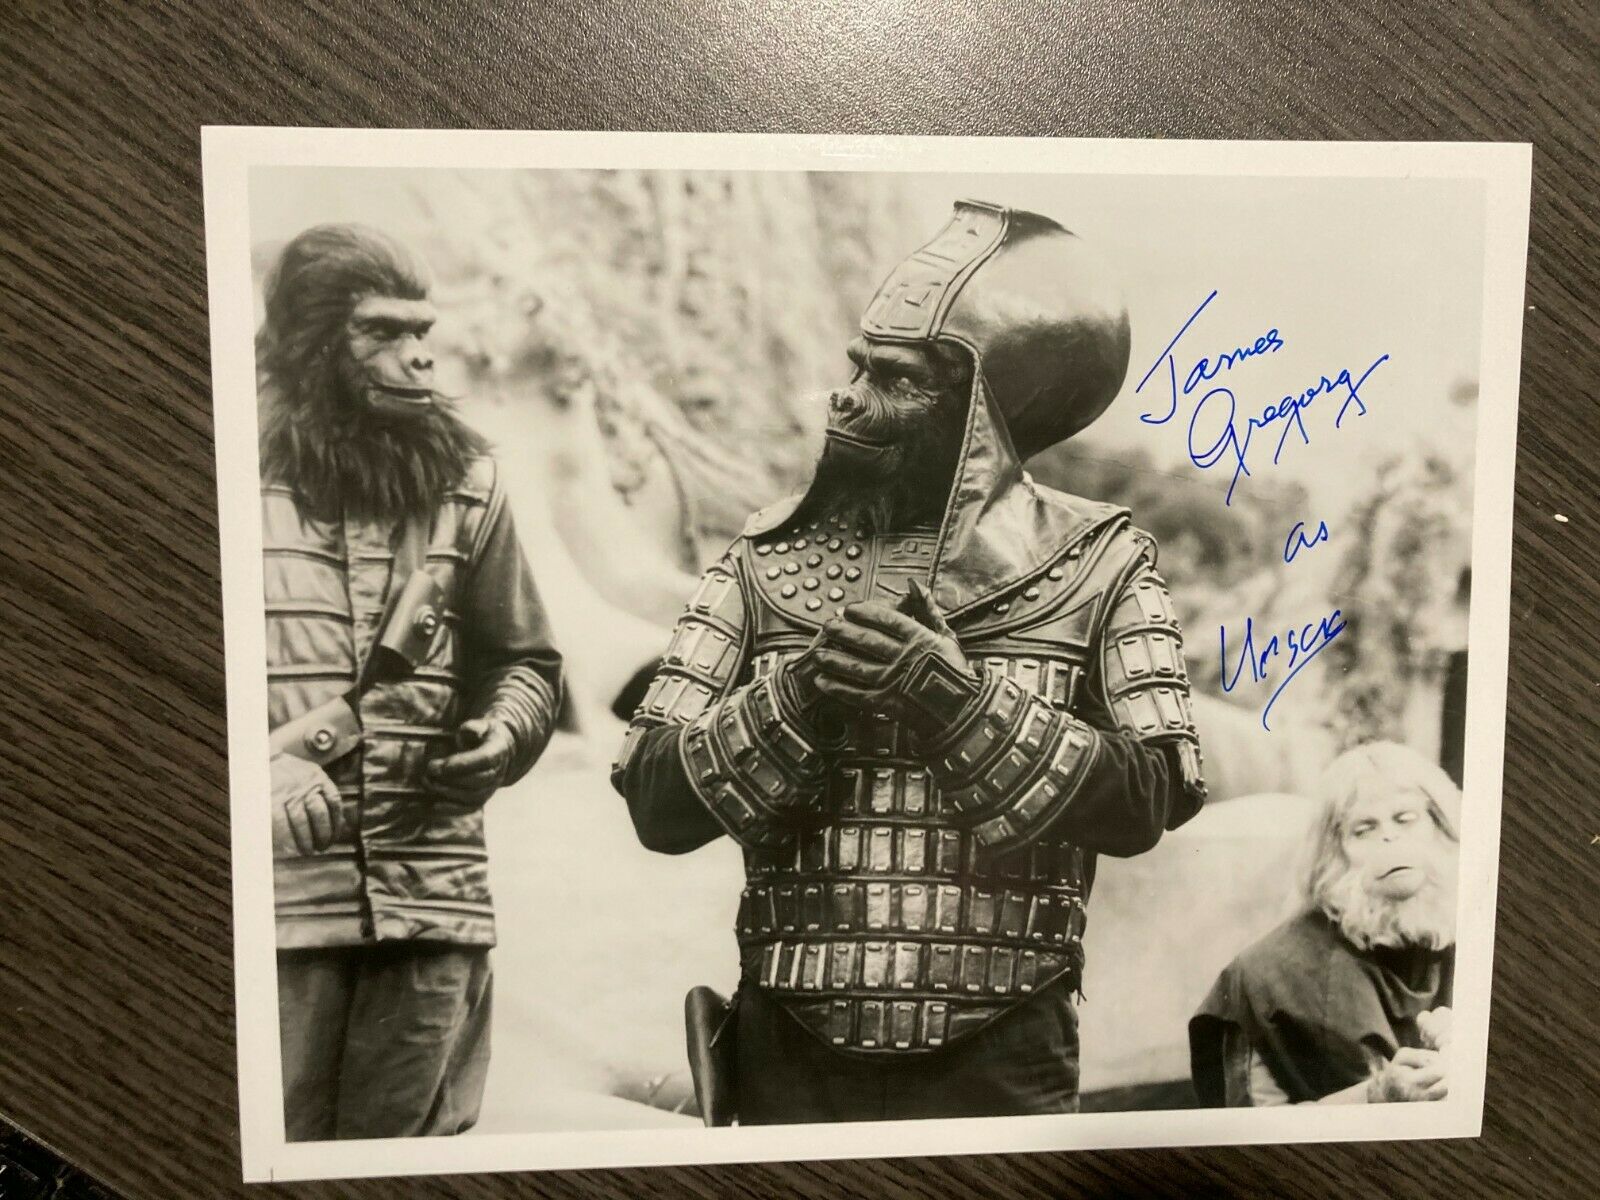 James Gregory Planet Of The Apes 8x10 Autographed Signed Glossy Photo